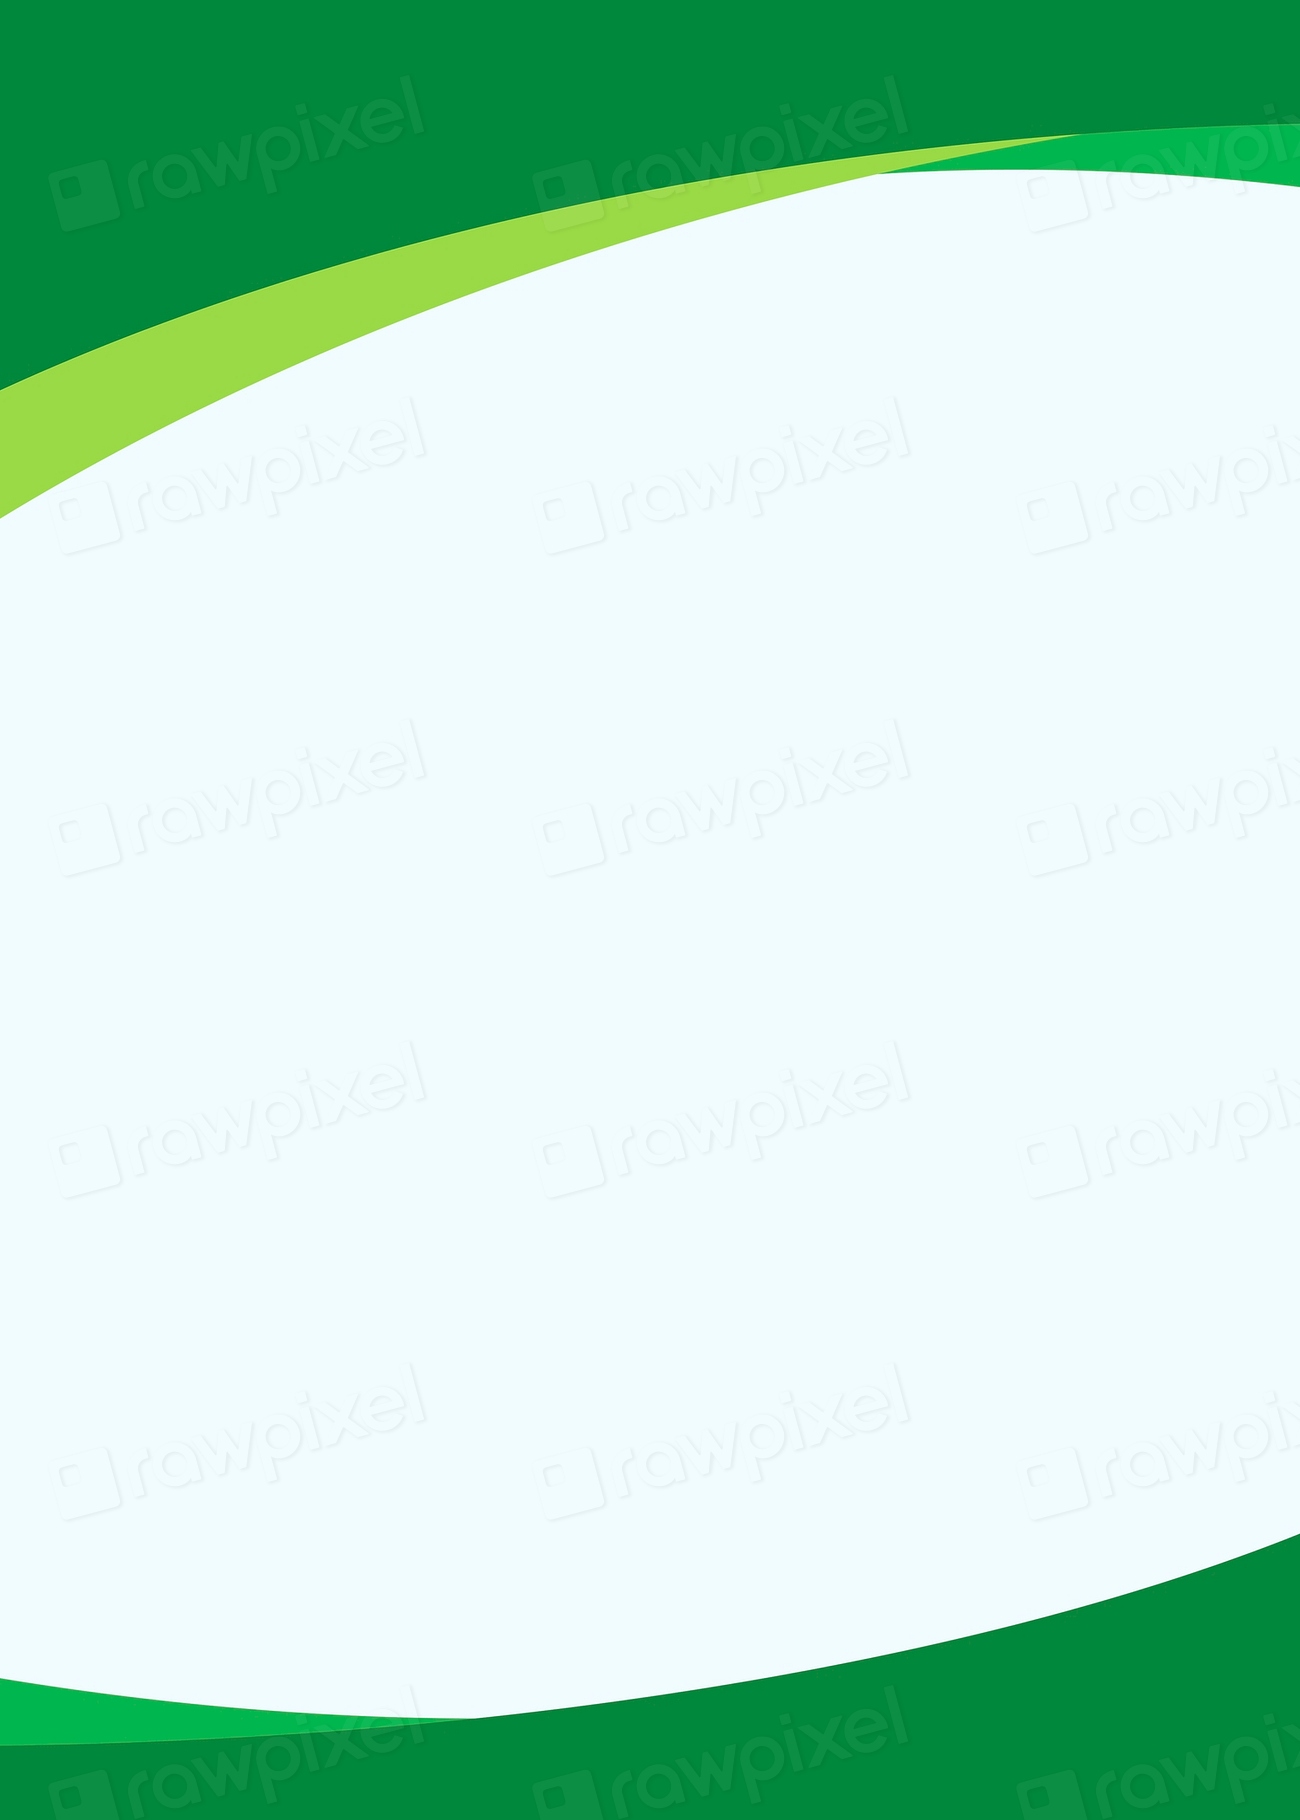 Eco green business background psd | Premium PSD - rawpixel